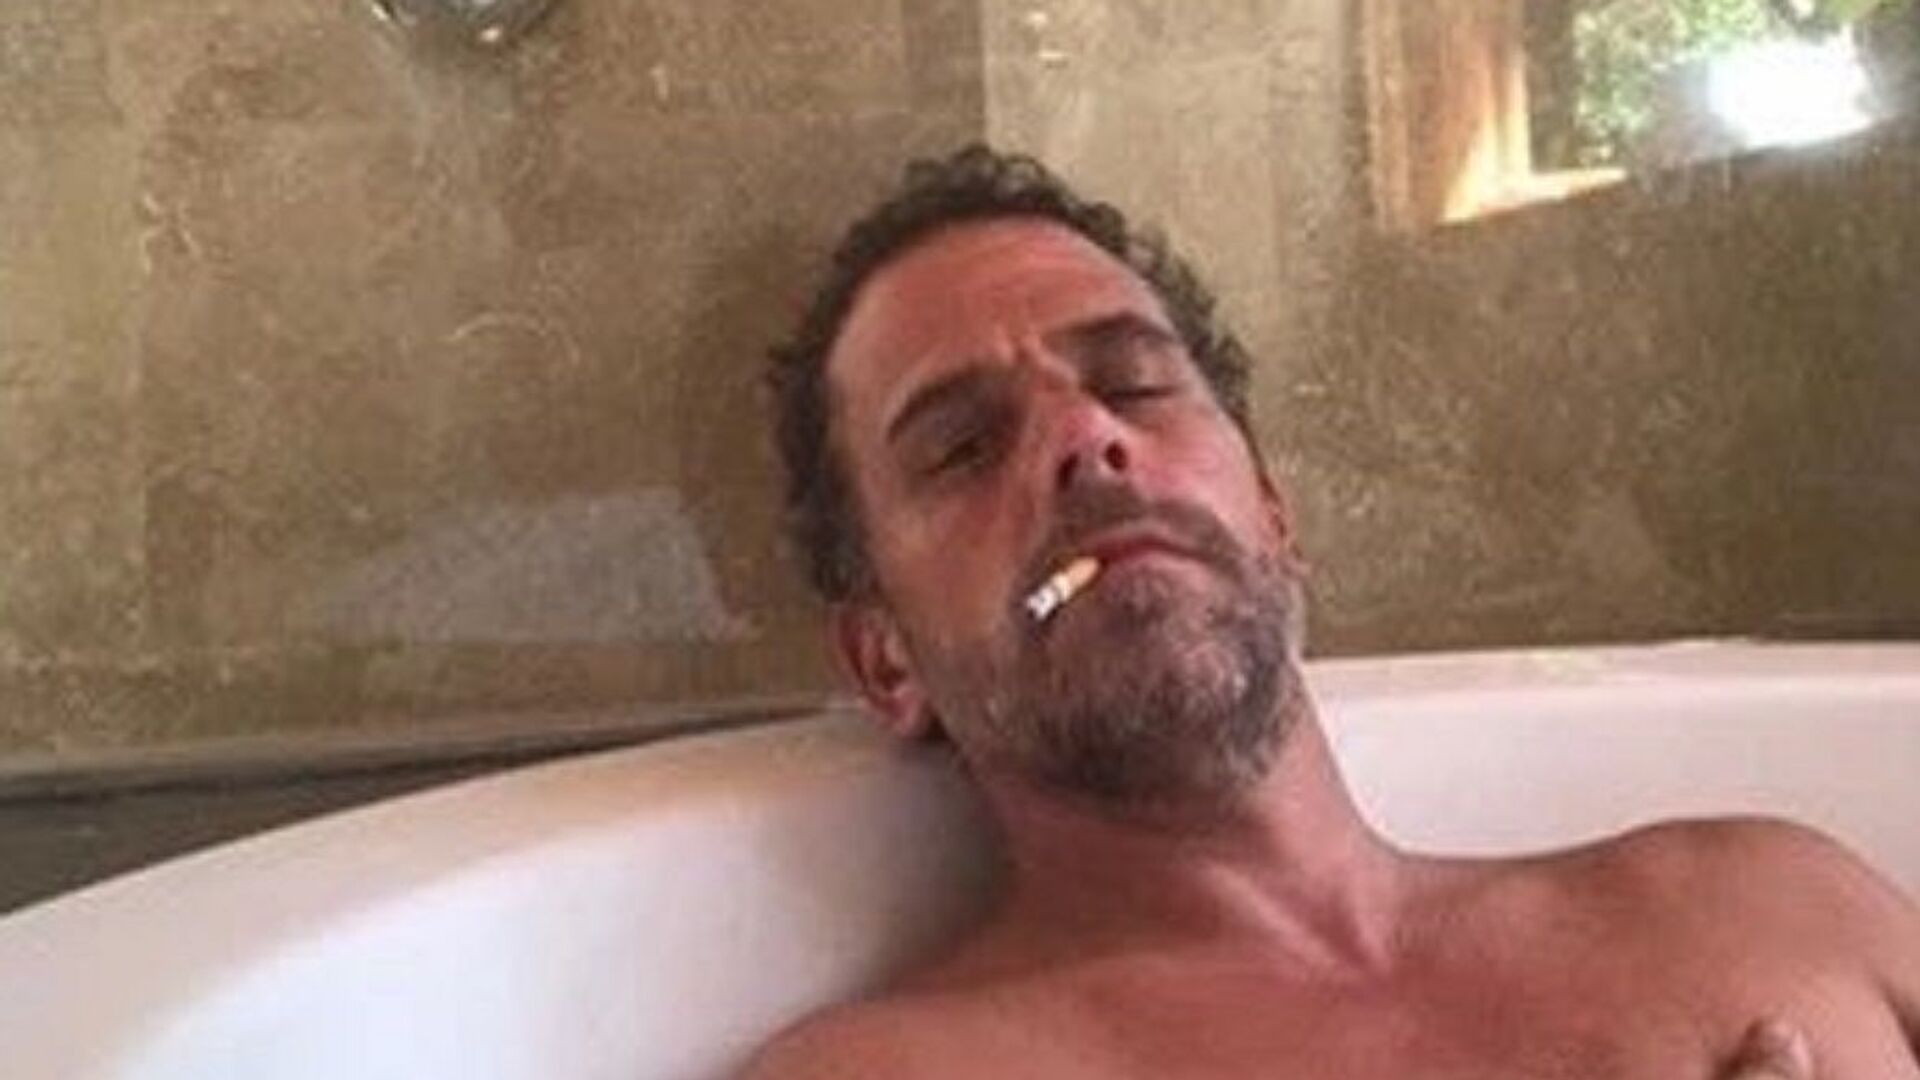 Photo of Hunter Biden relaxing in a bathtub, reportedly taken from a computer dropped off at a Delaware computer repair shop. - Sputnik International, 1920, 02.04.2022